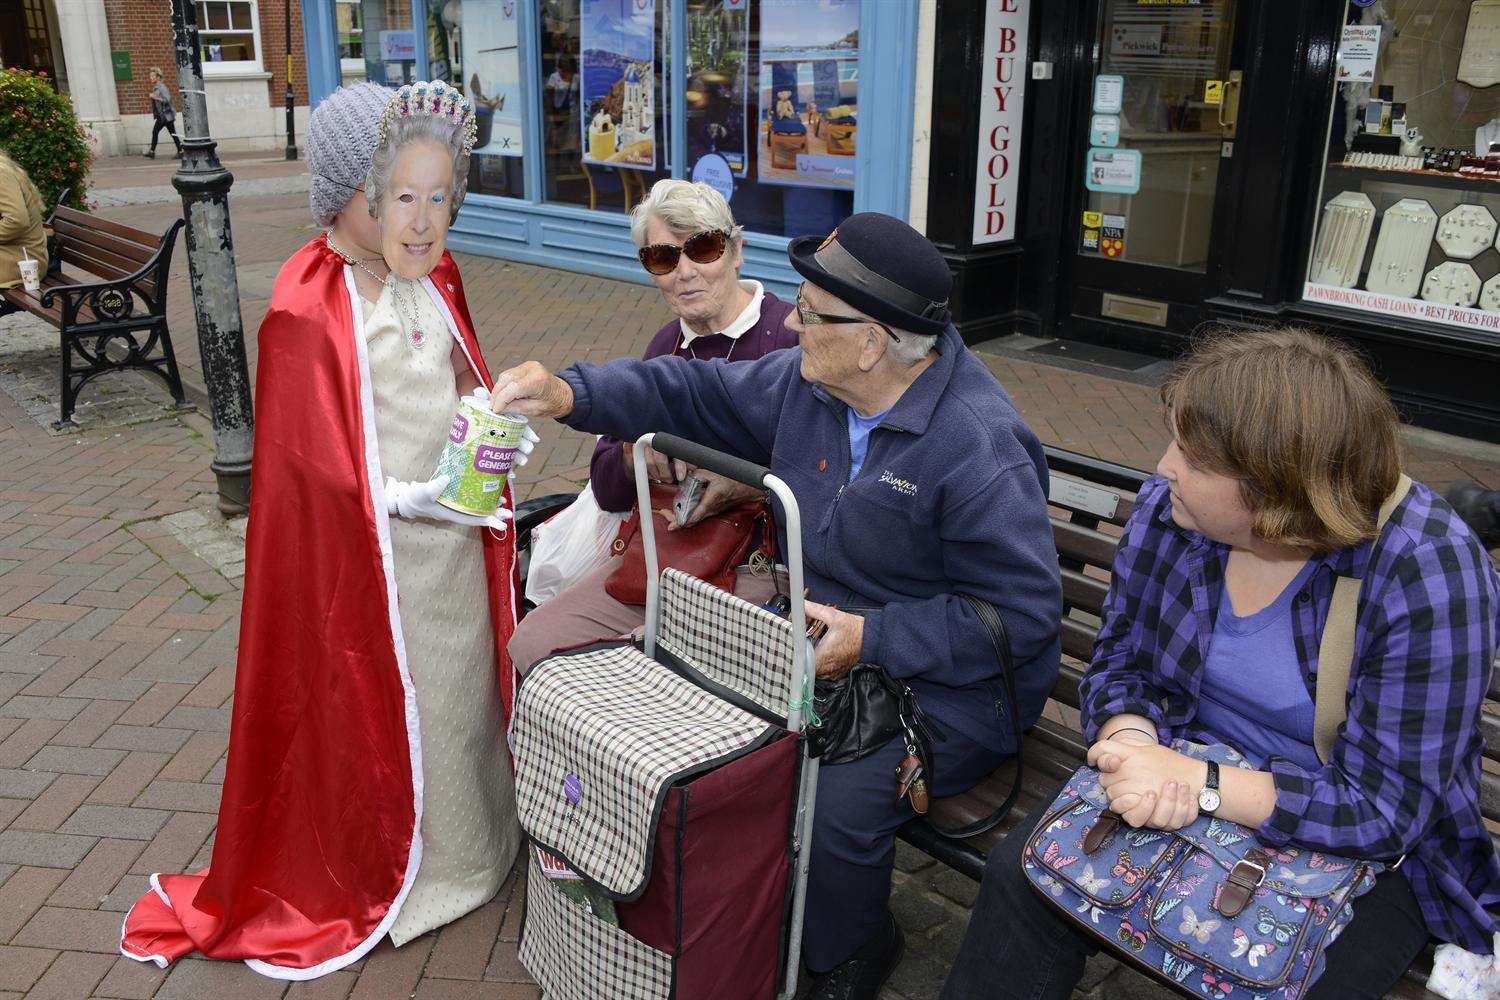 Bemused shoppers in Ashford donate to the Queen, aka John Kellam, collecting for Macmillan Cancer Research